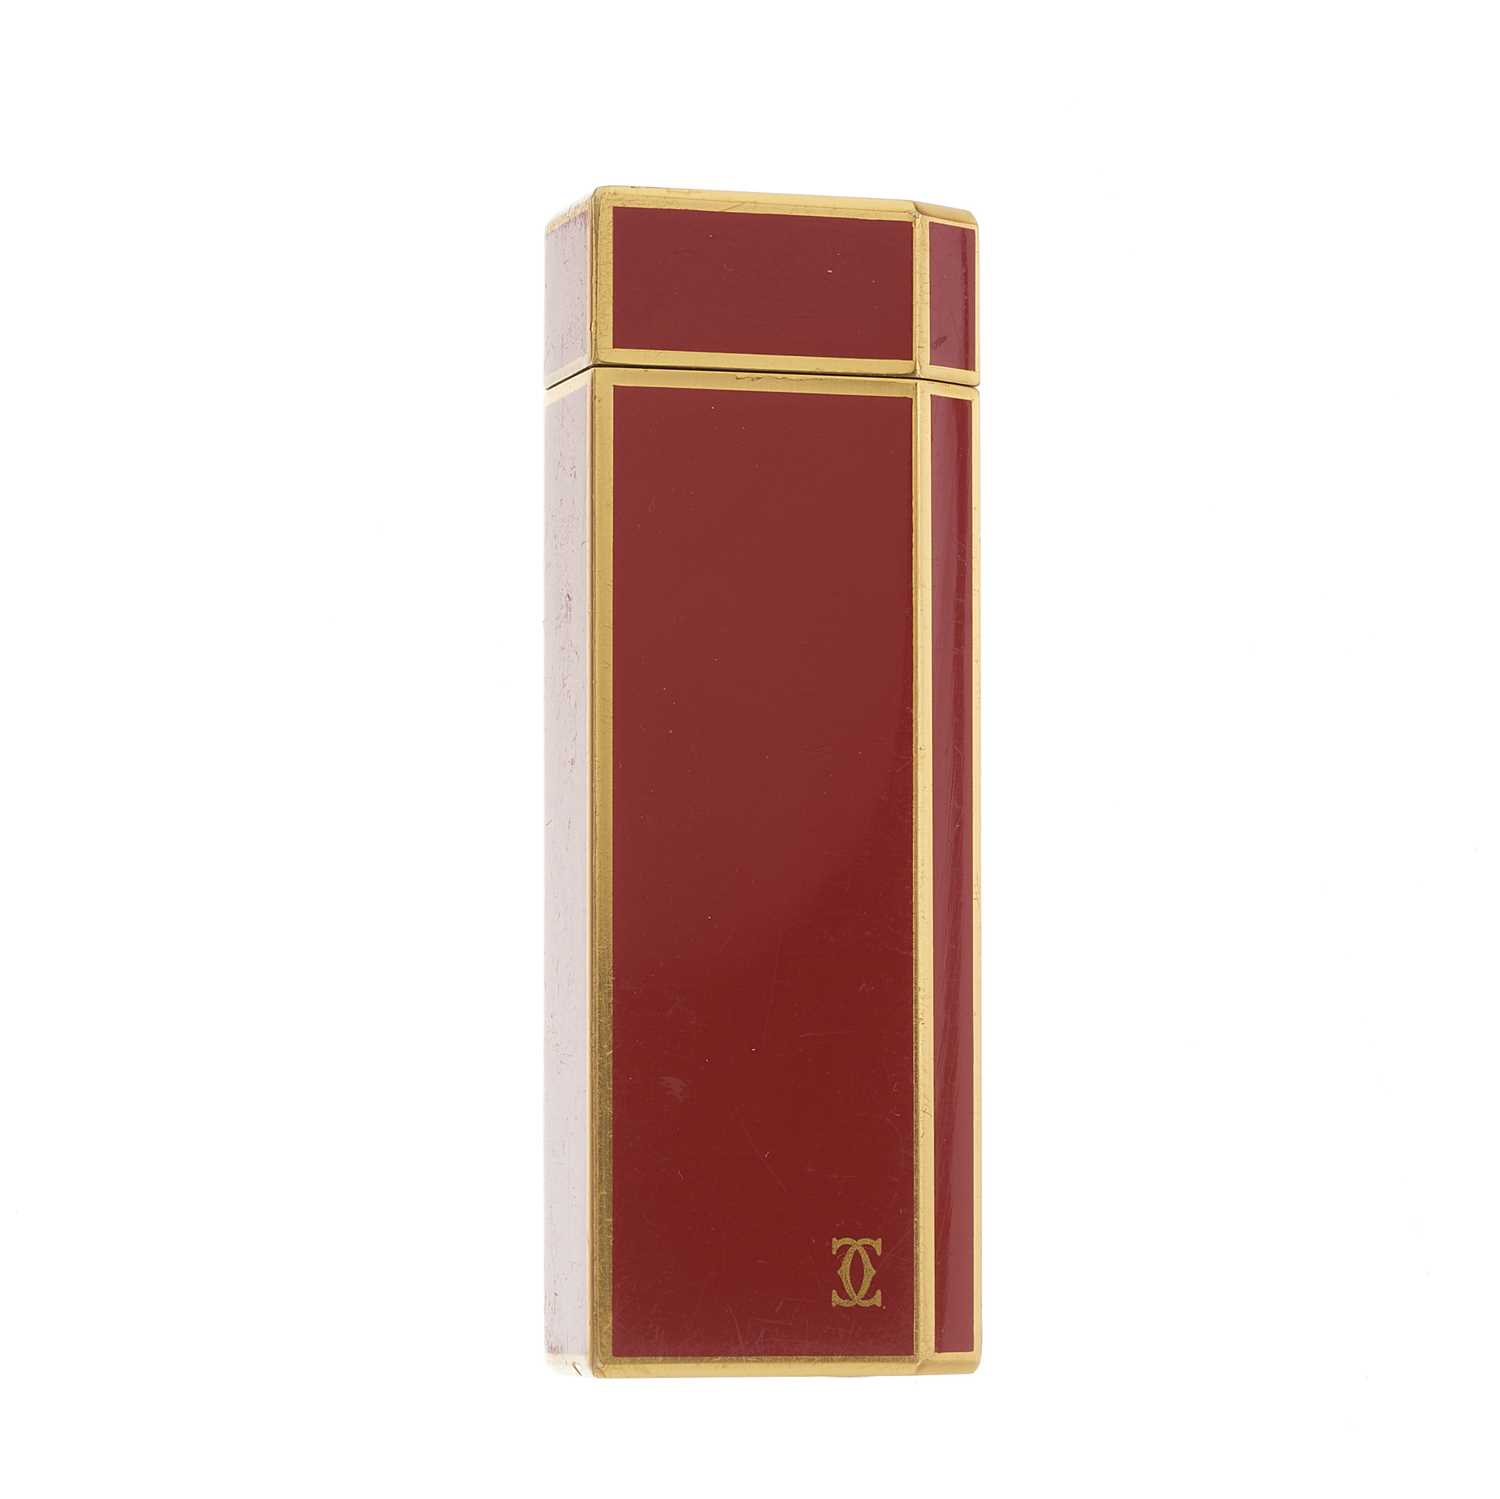 Cartier, an enamel lighter, designed with a gold-plated metal and burnt orange enamel casing, weight